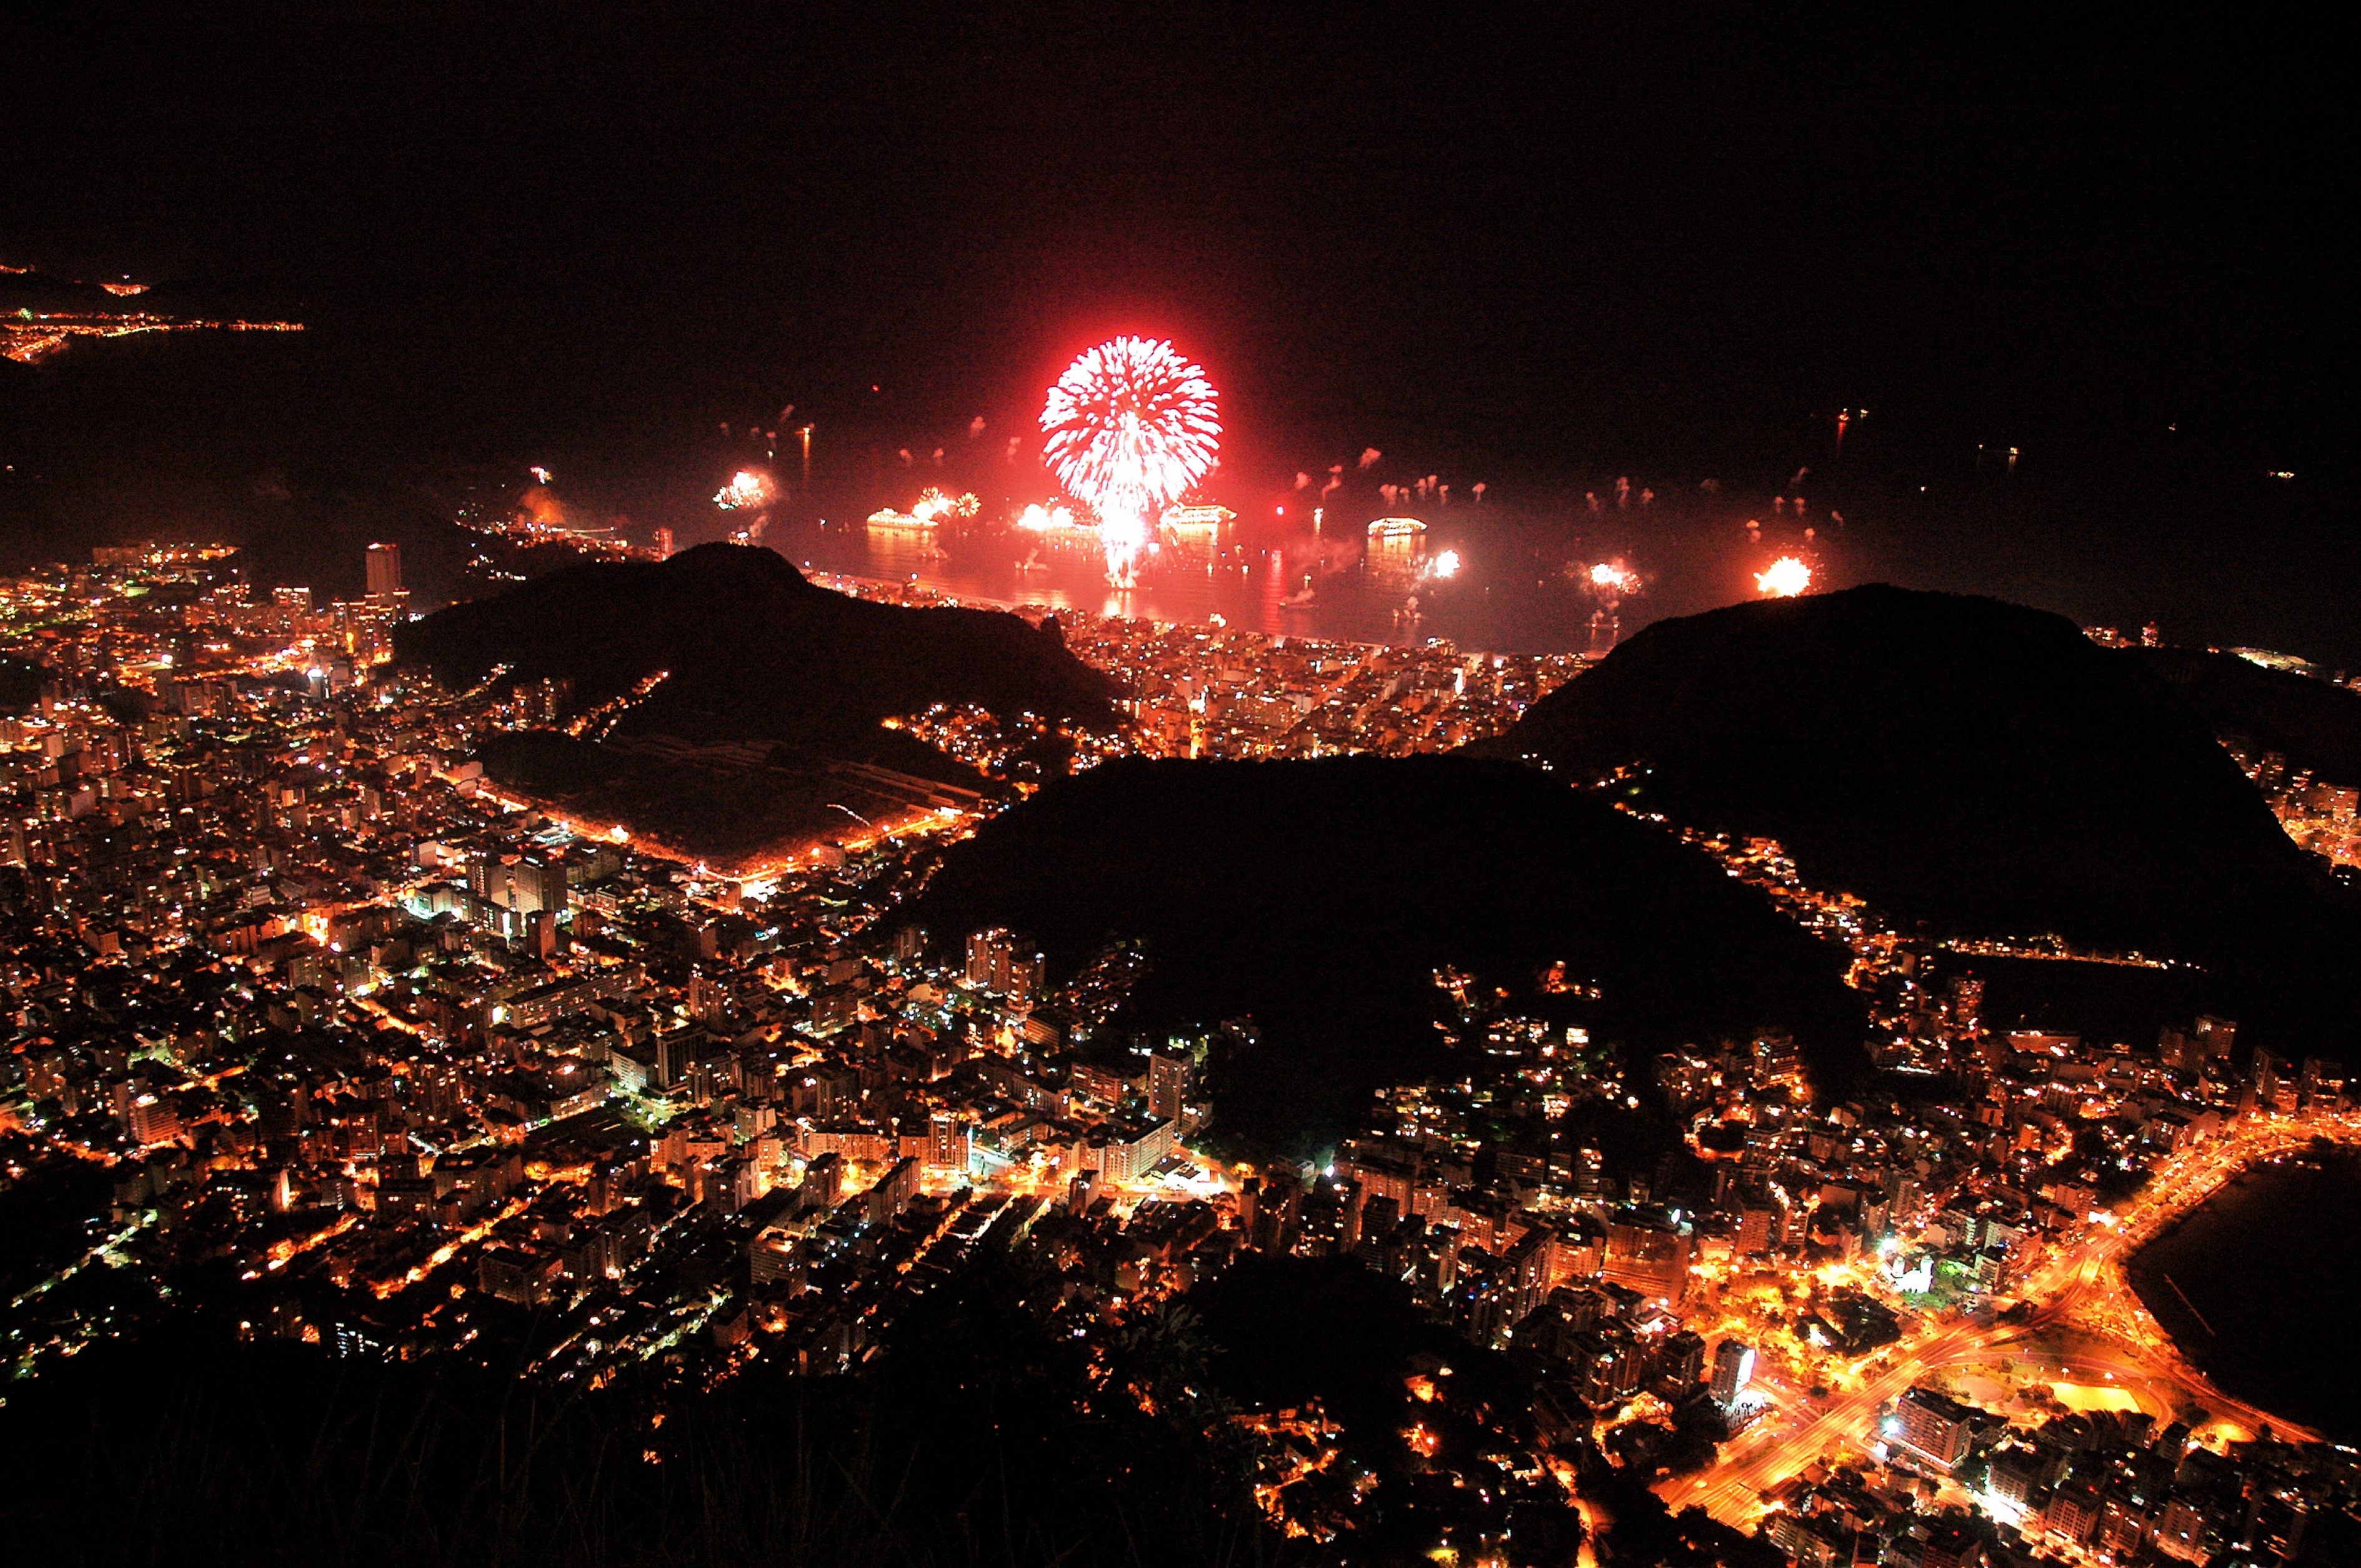 New's Year Eve in Rio